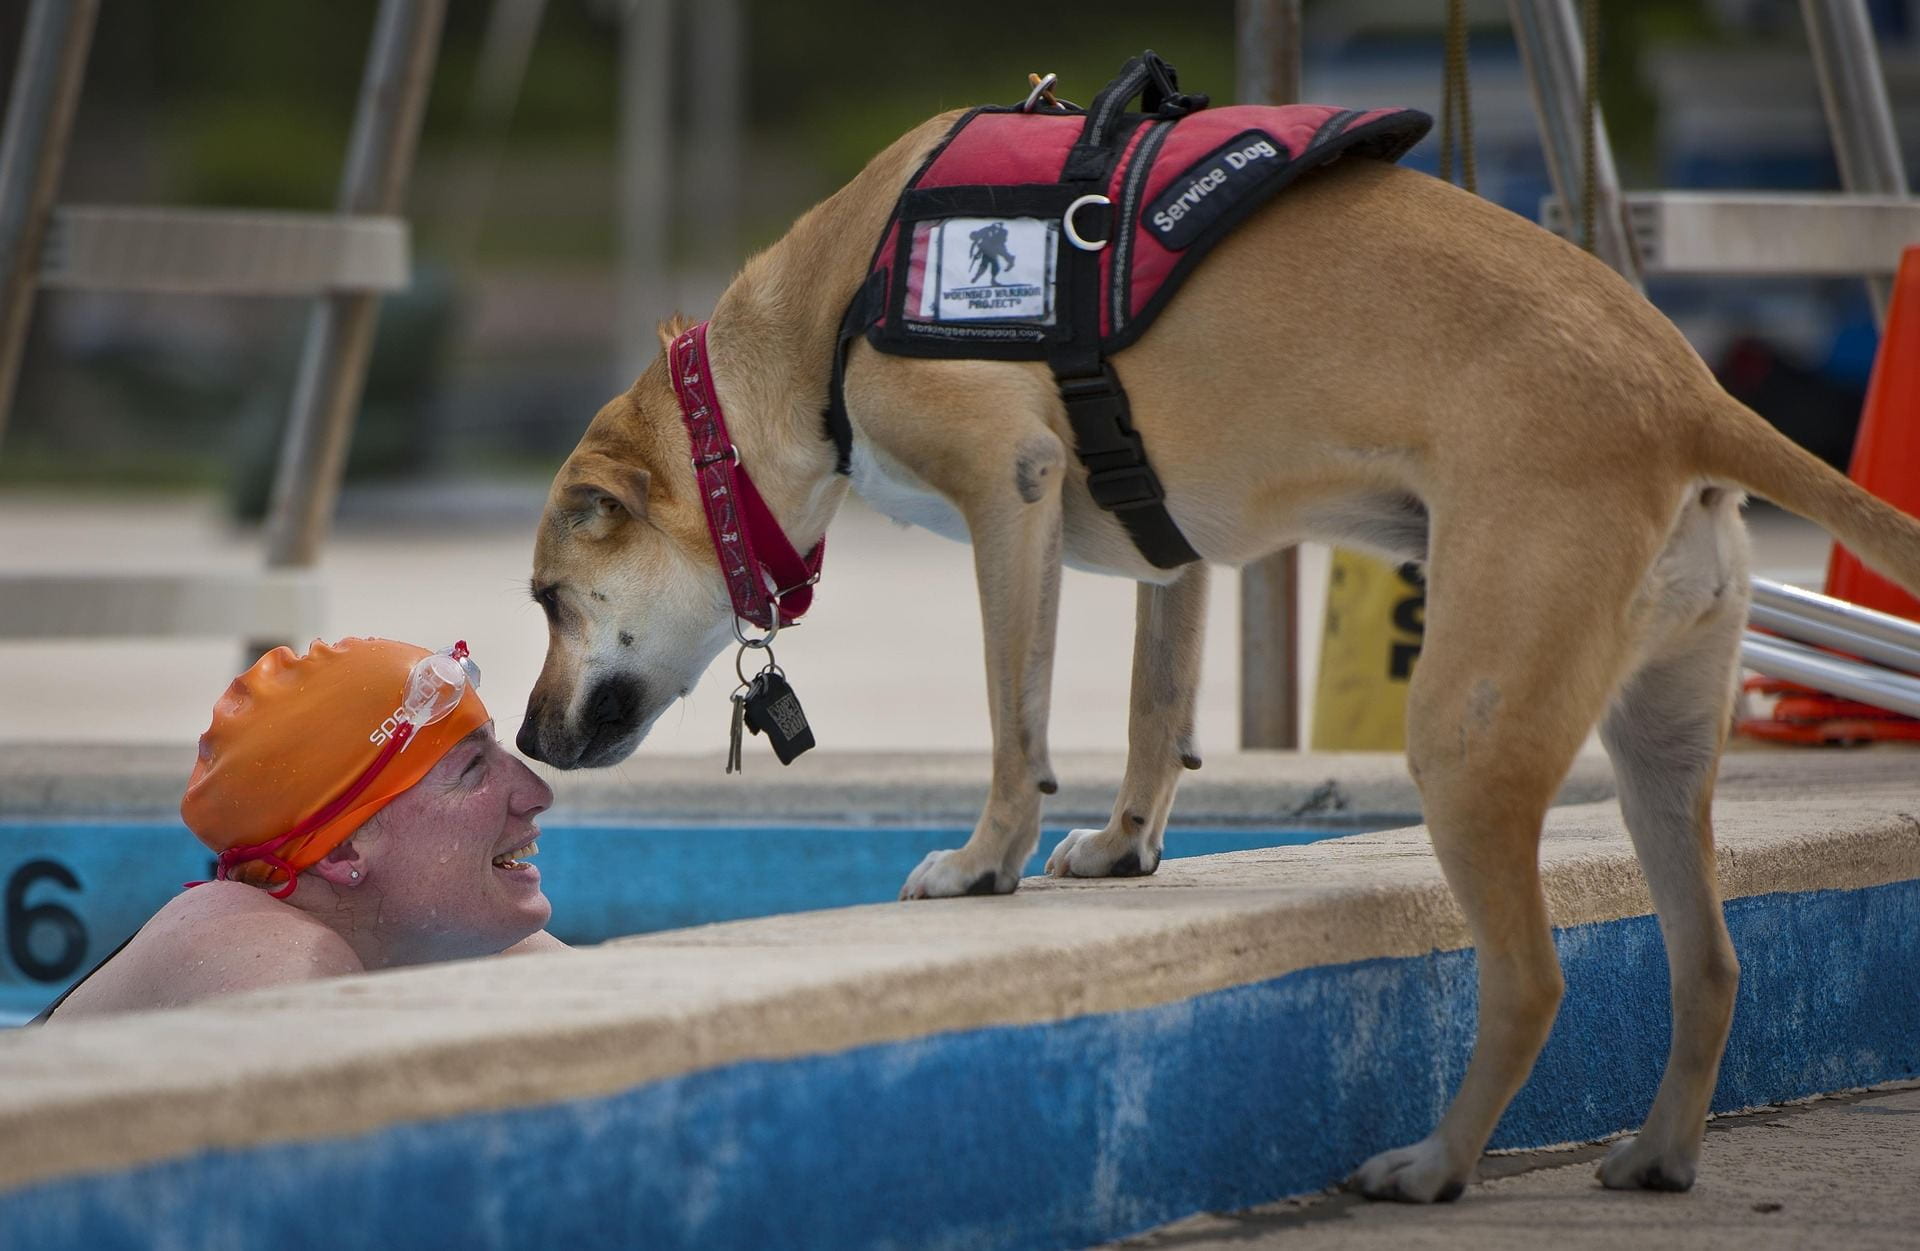 [A service dog, with yellow lab features, stands at the side of a pool with it's harness on while sniffing the forehead of it's handler who is in the pool.]